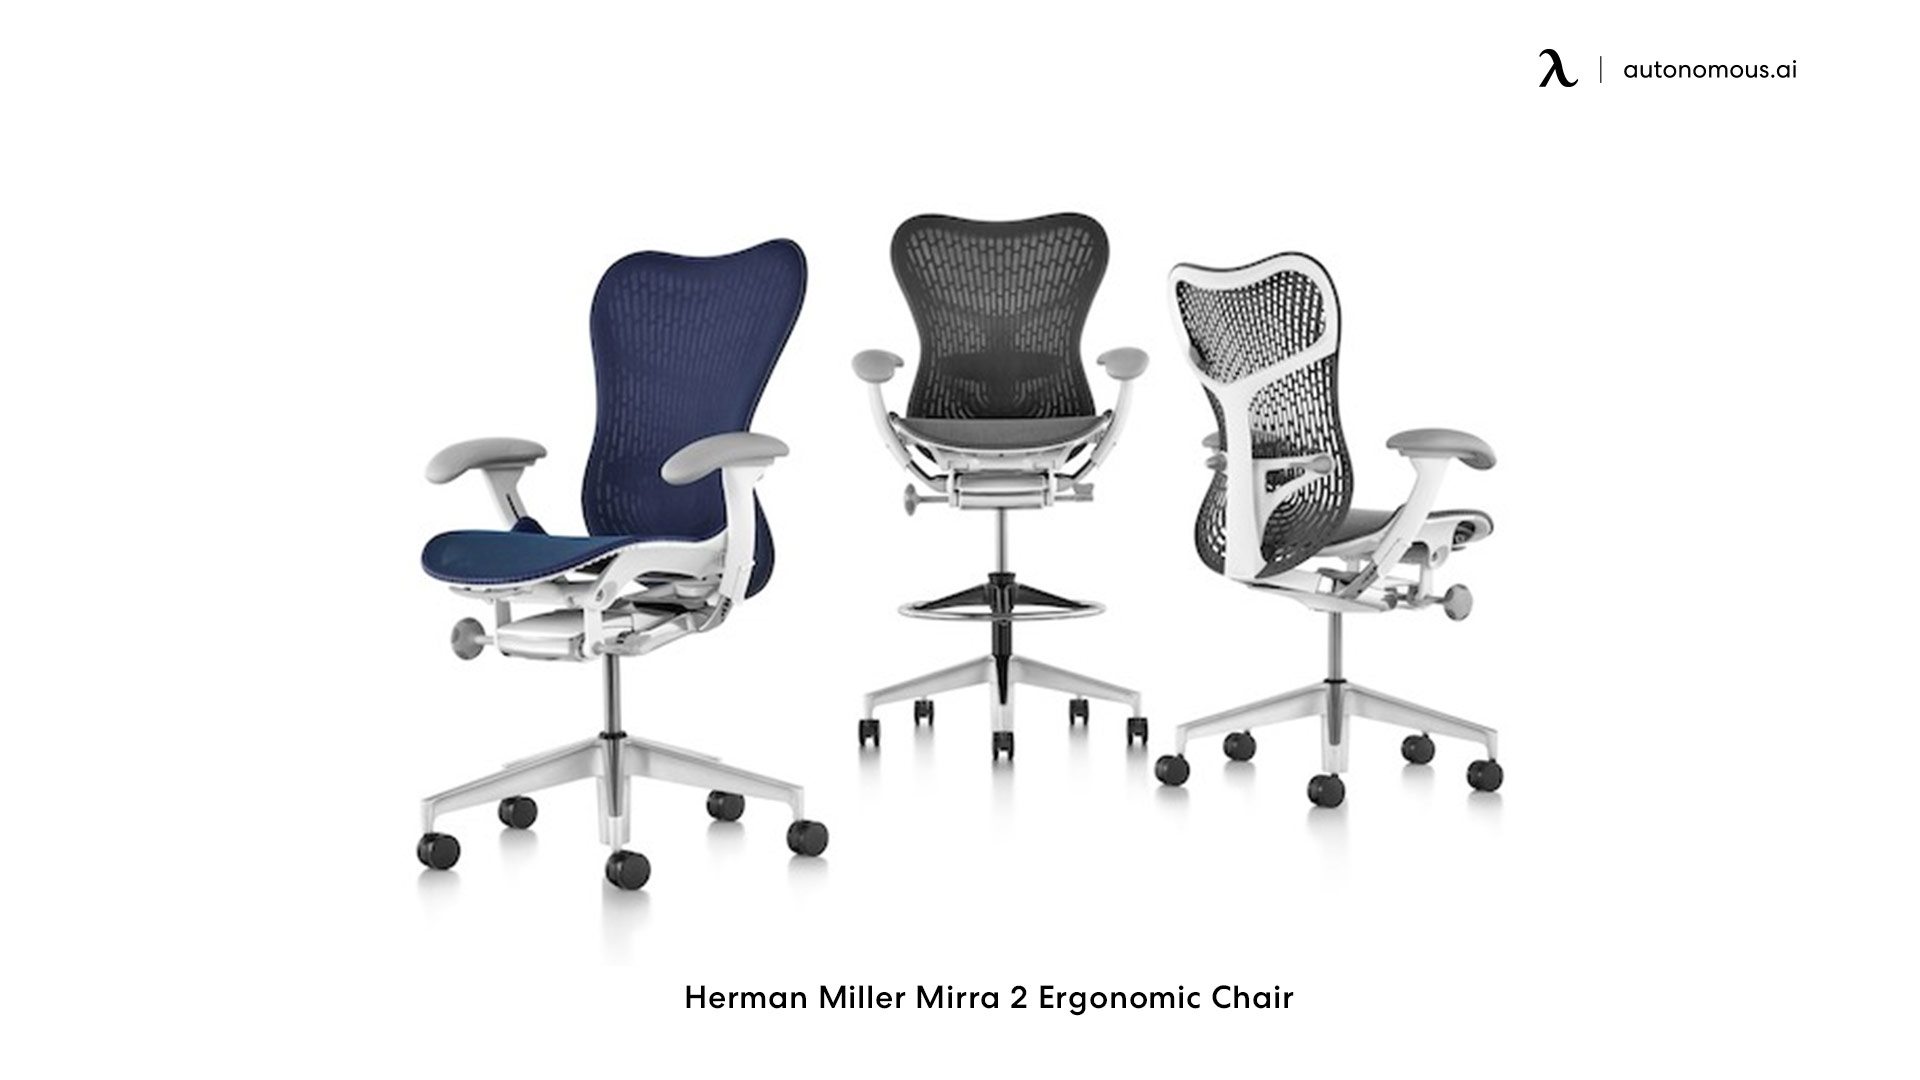 Herman Miller Mirra 2 home office chair with back support